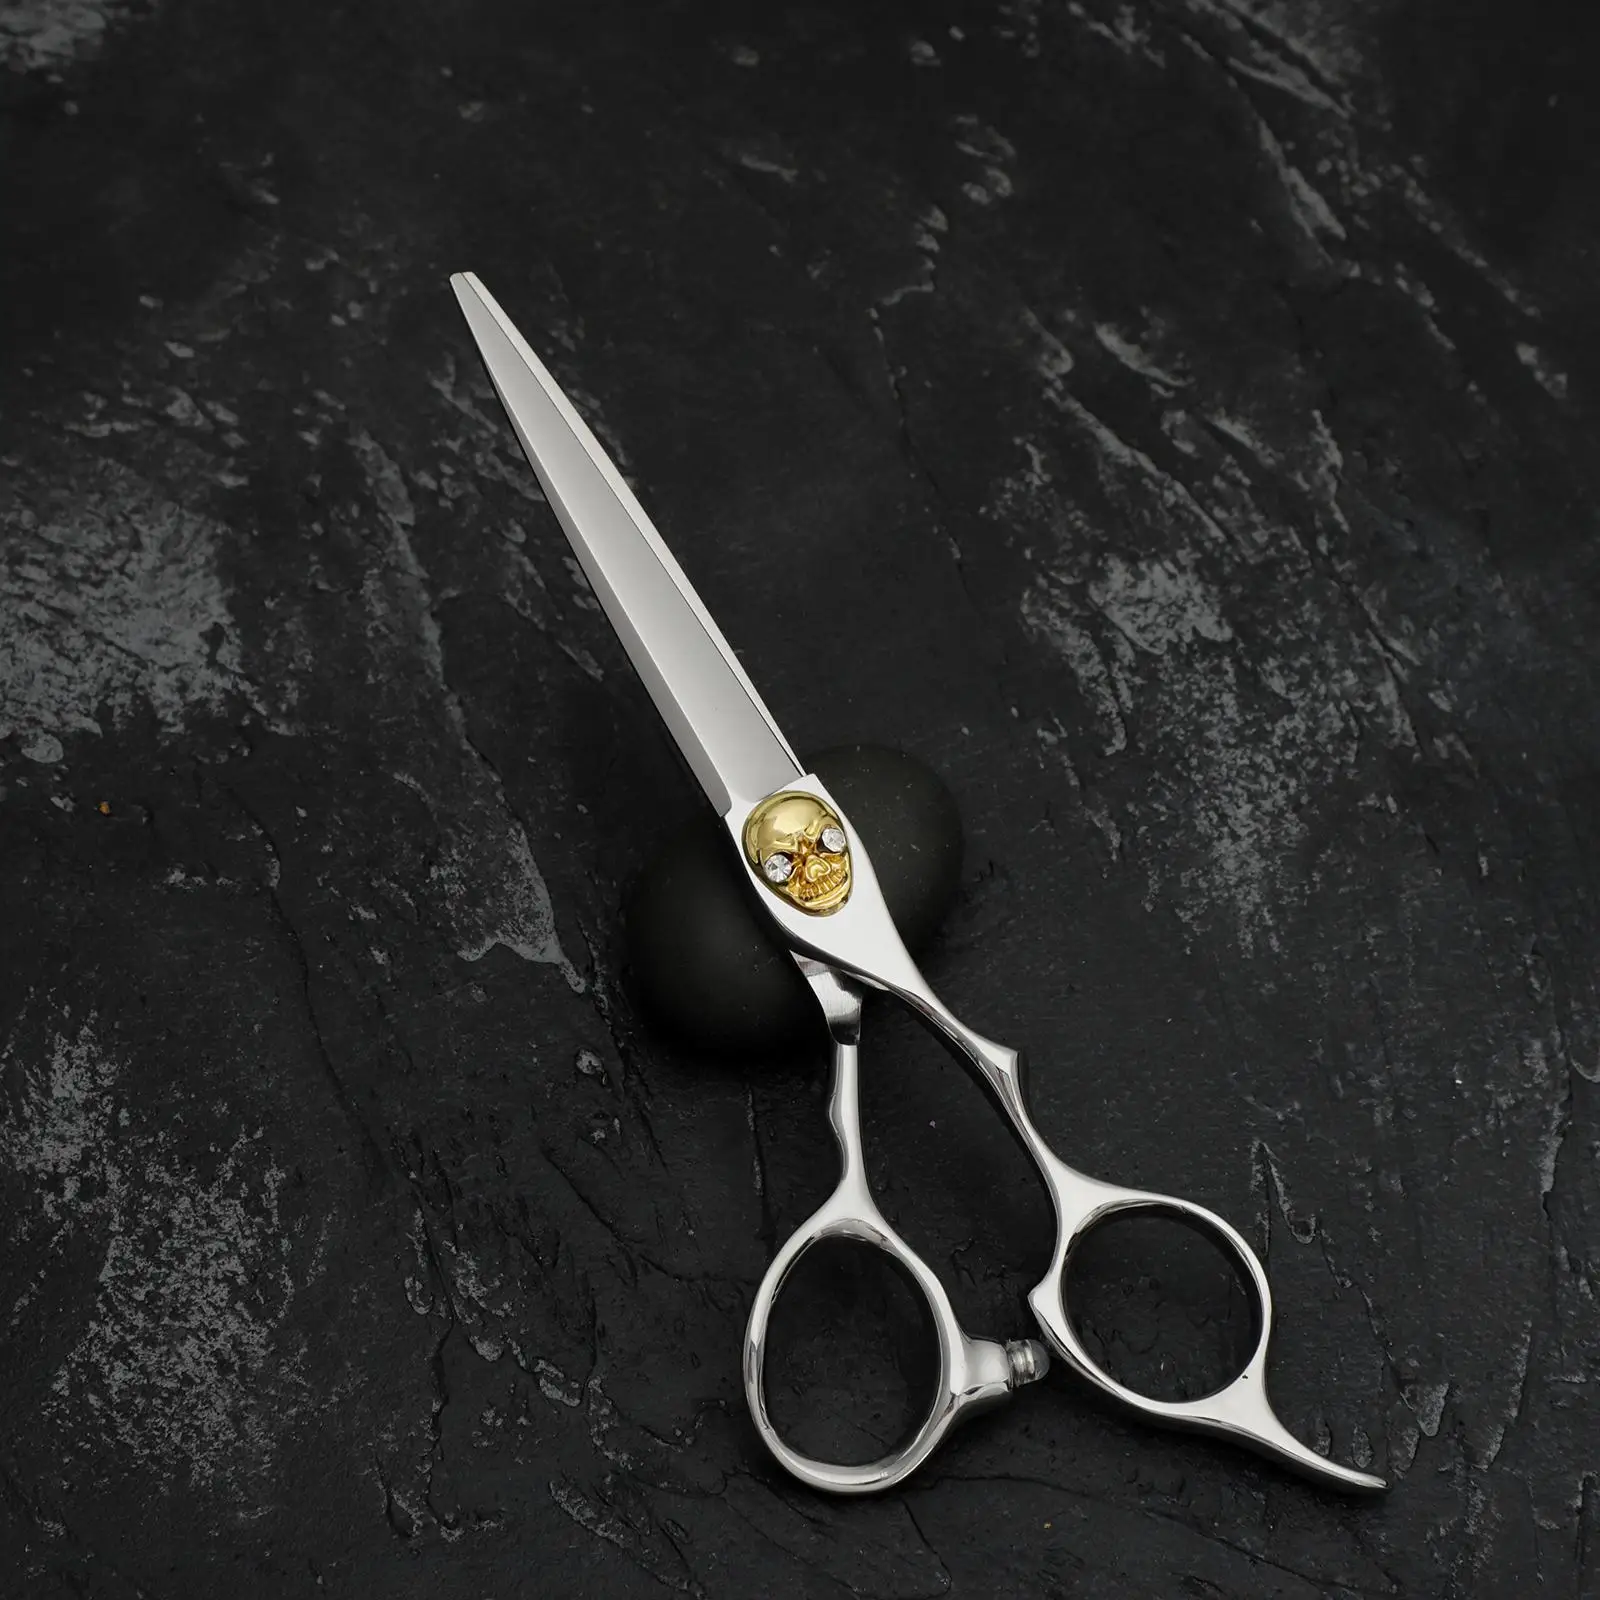 Pro Hair Cutting Thinning Scissor Anti-Rust Hairdressing Texturizing Thinning Shears for Hairdresser Bangs Trimming Pets 15cm